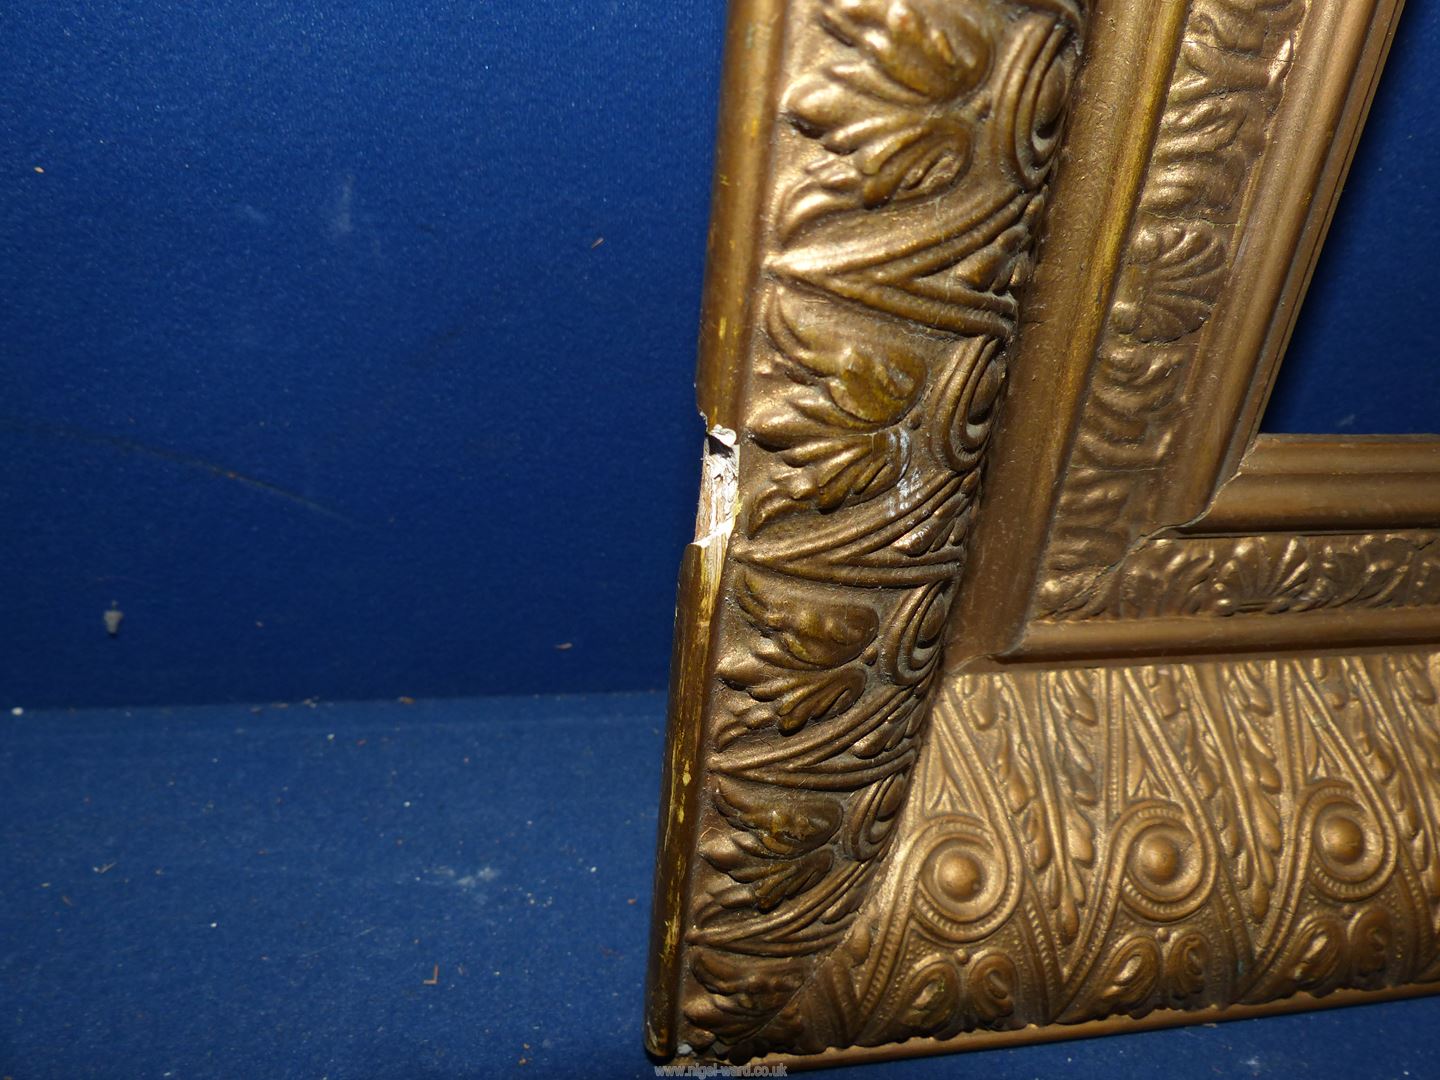 A large heavy ornate gilt frame, overall 2' 6" x 2' 2", aperture 1' 10 1/2" x 1' 6 1/2", - Image 4 of 5